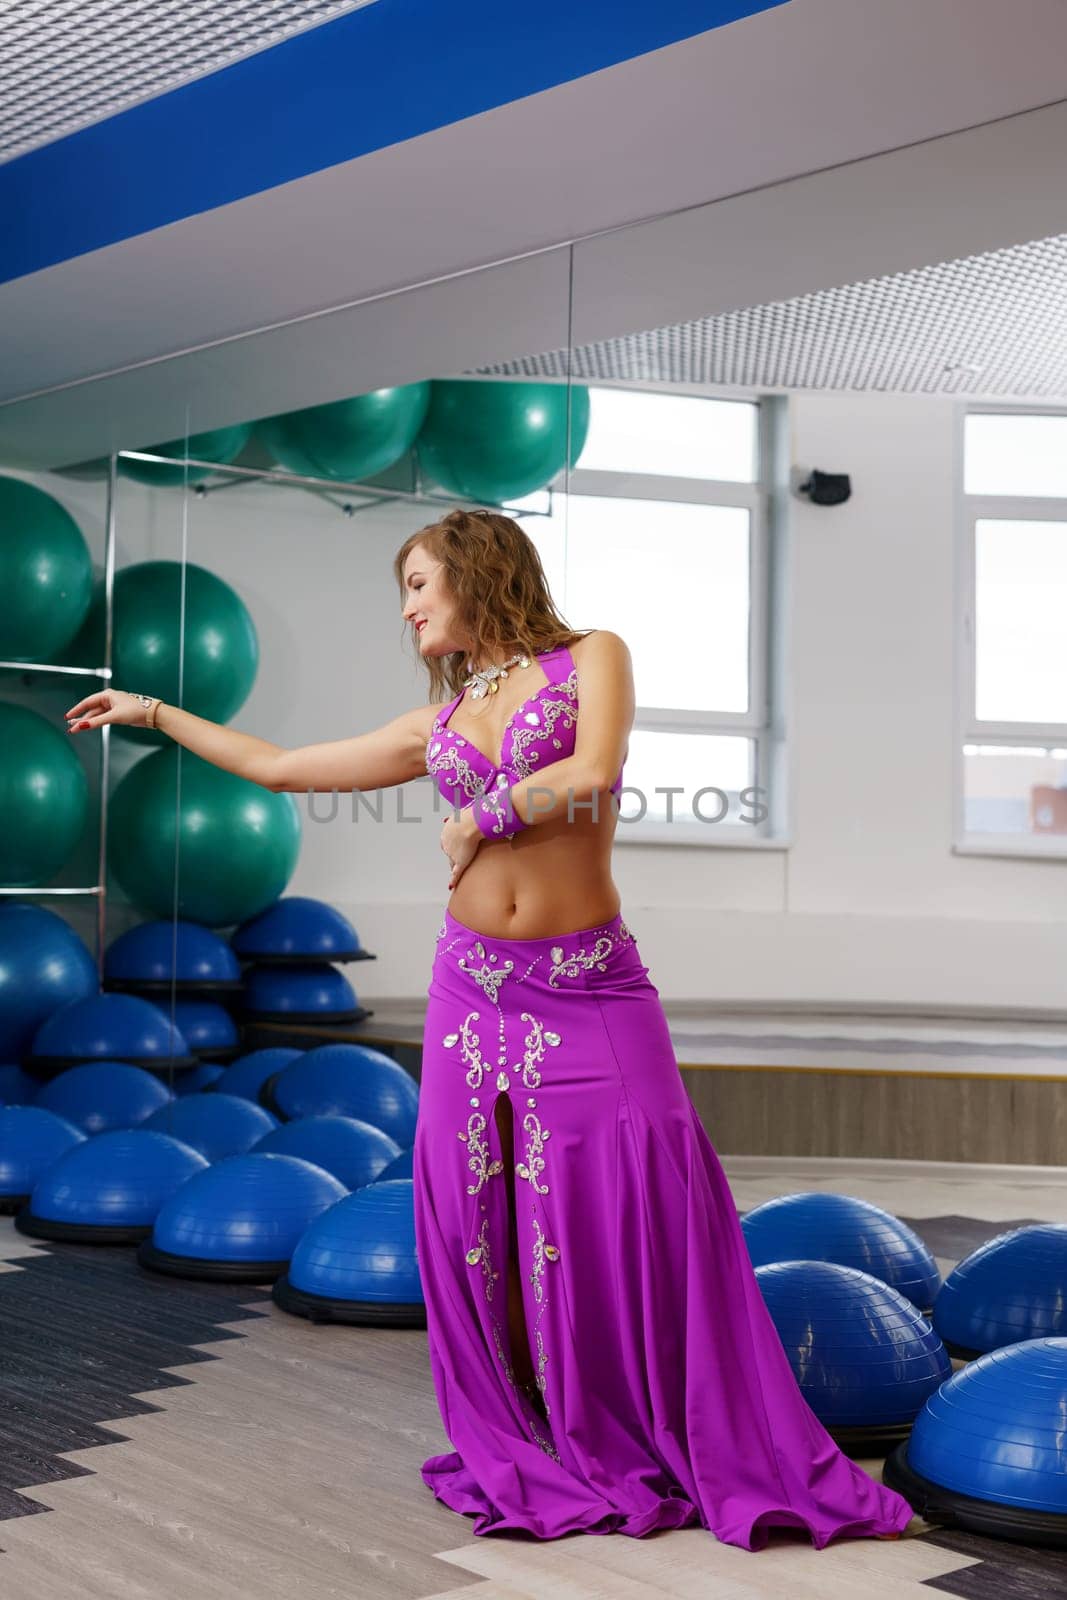 In gym. Image of beautiful belly dancer posing at camera